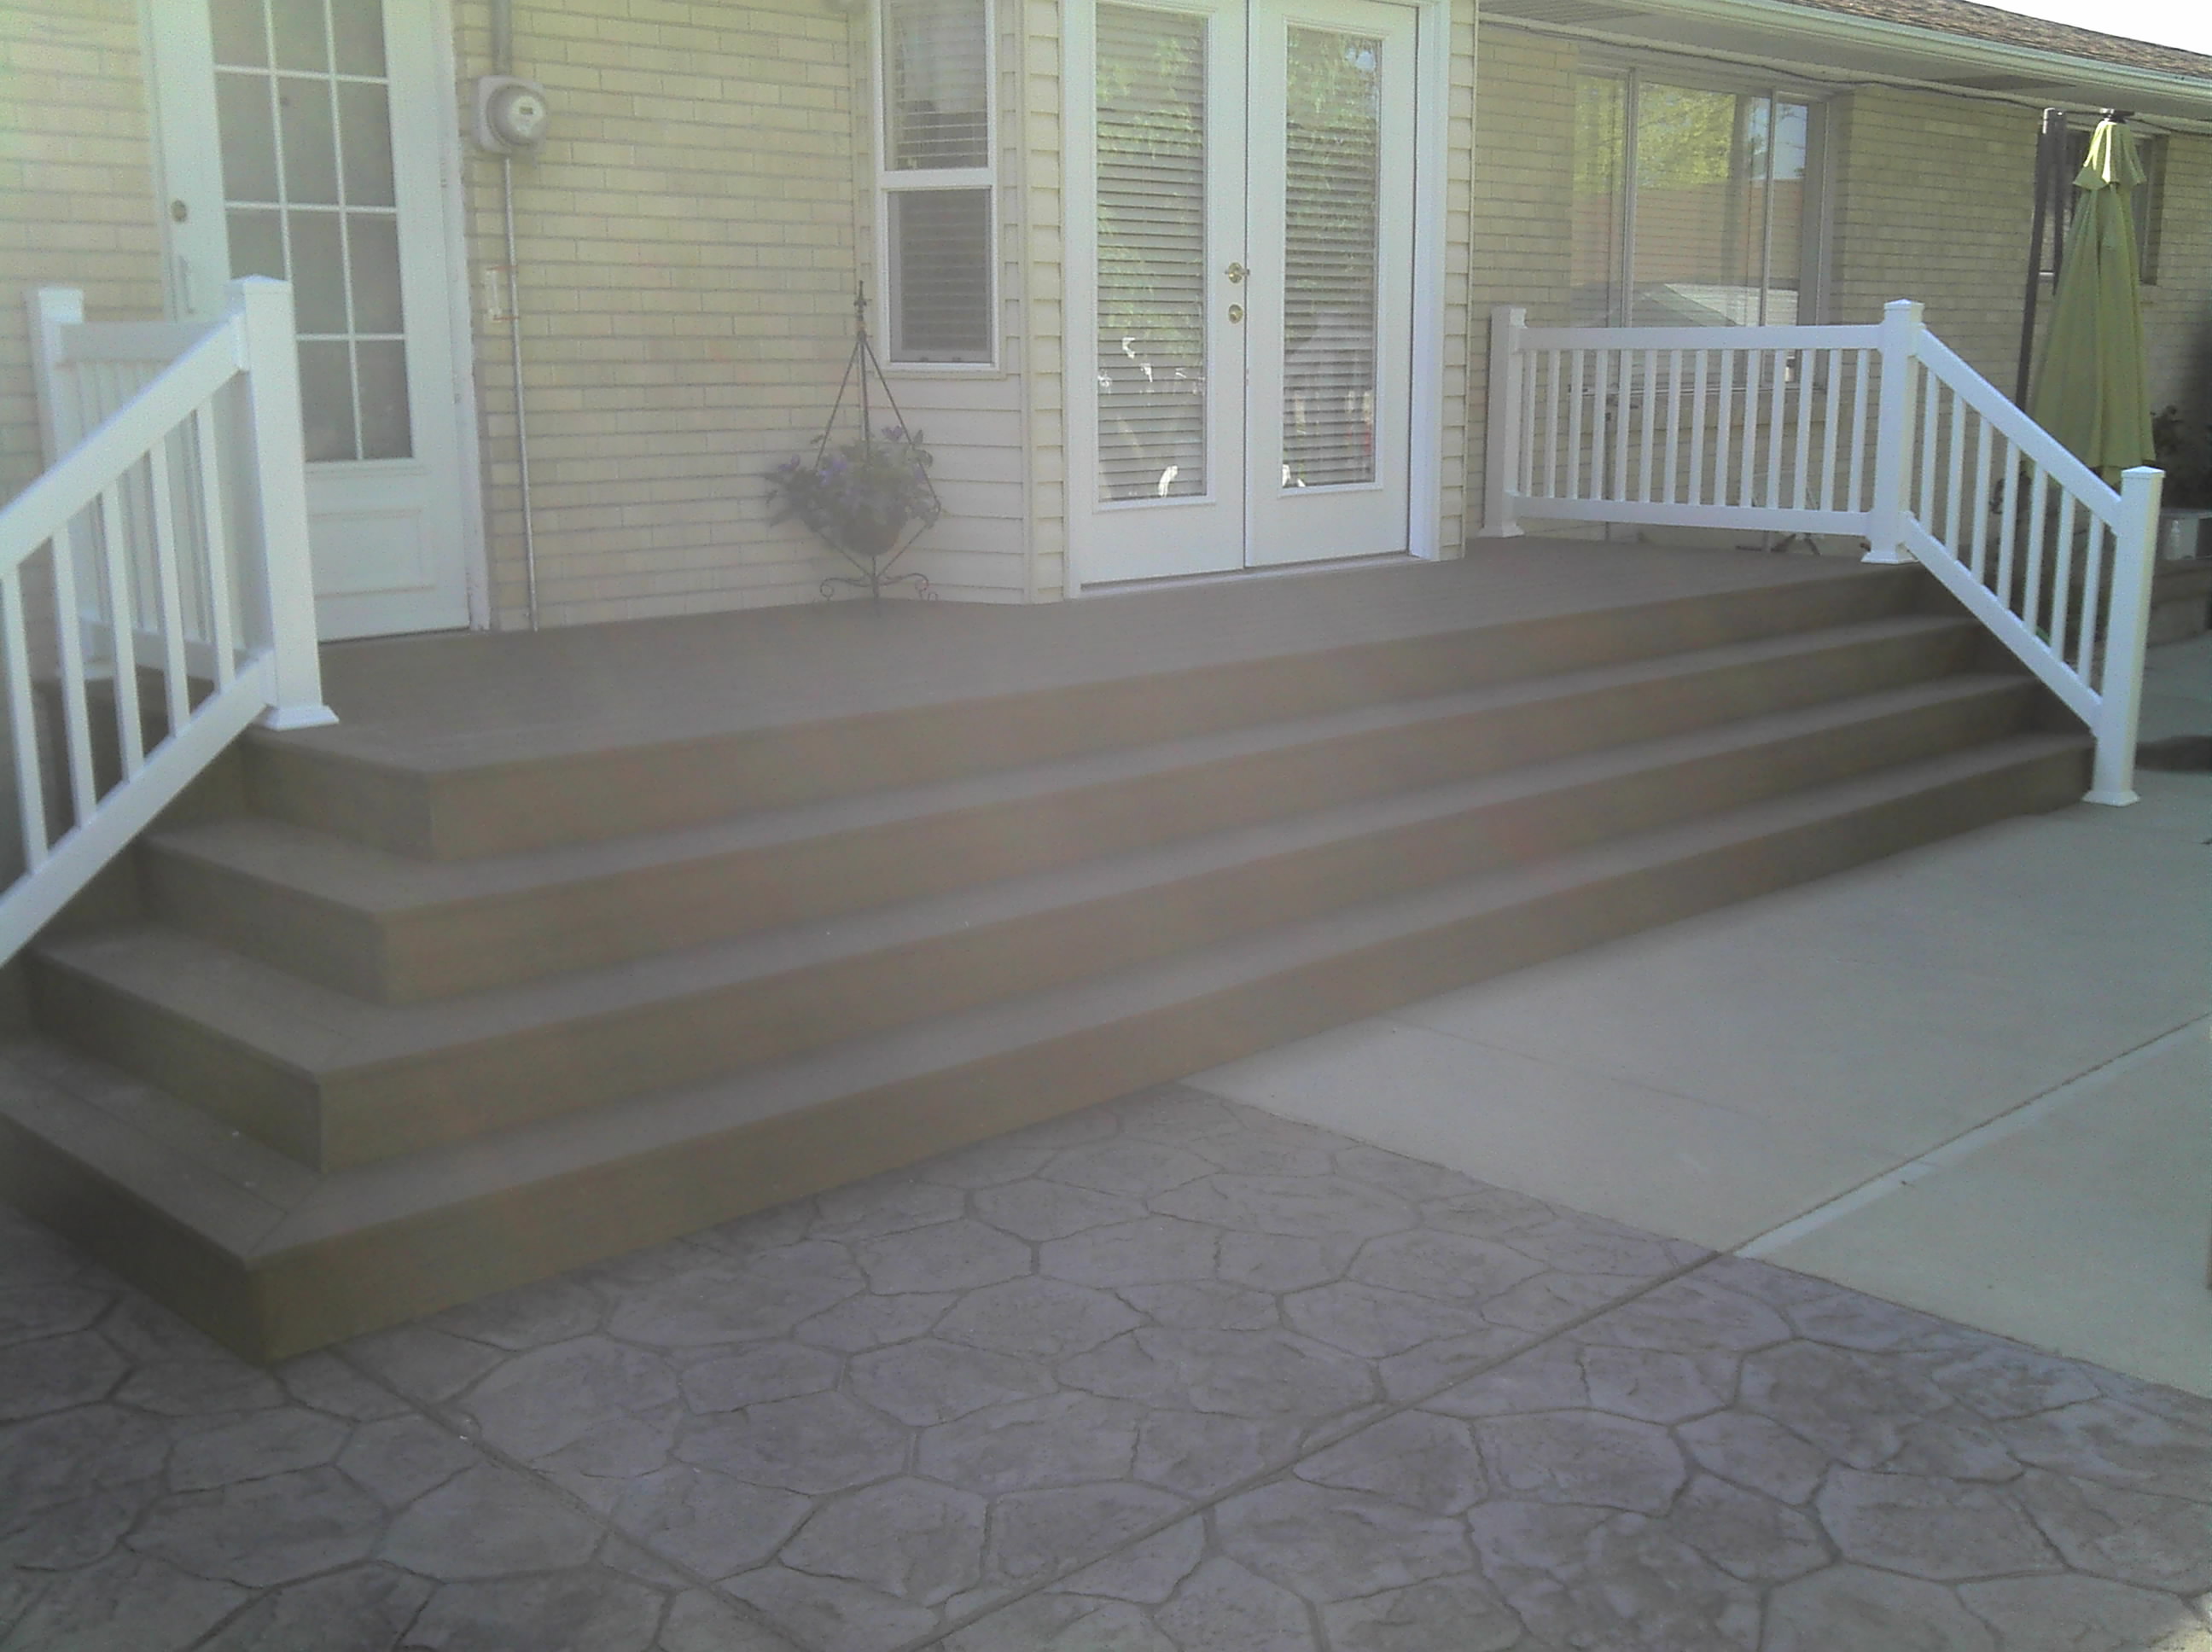 Build-Over of Concrete Steps with Composite Decking